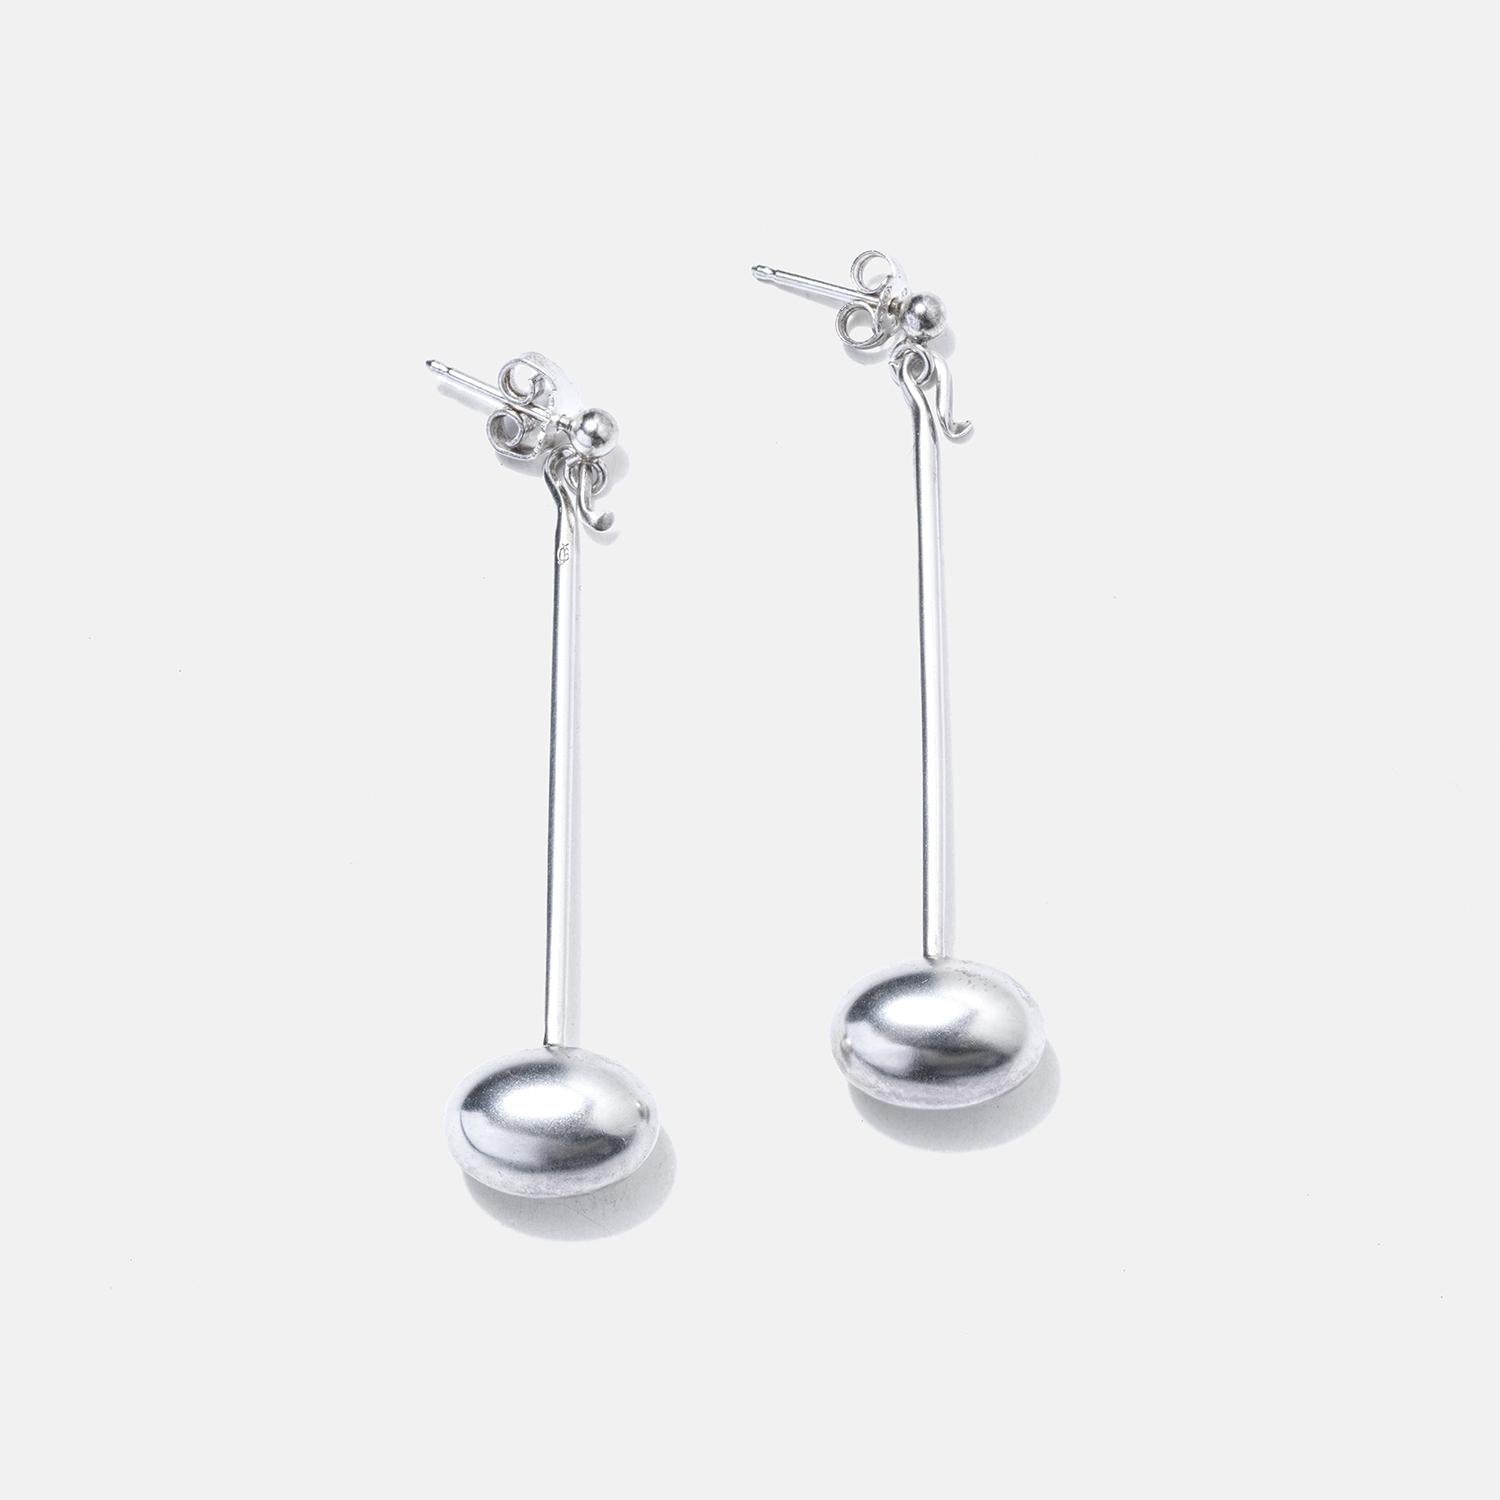 These earrings are crafted from sterling silver, featuring a sleek and minimalistic design. Each earring consists of a stud at the lobe from which a slender, straight rod extends, ending in a rounded, elongated bead that adds a touch of